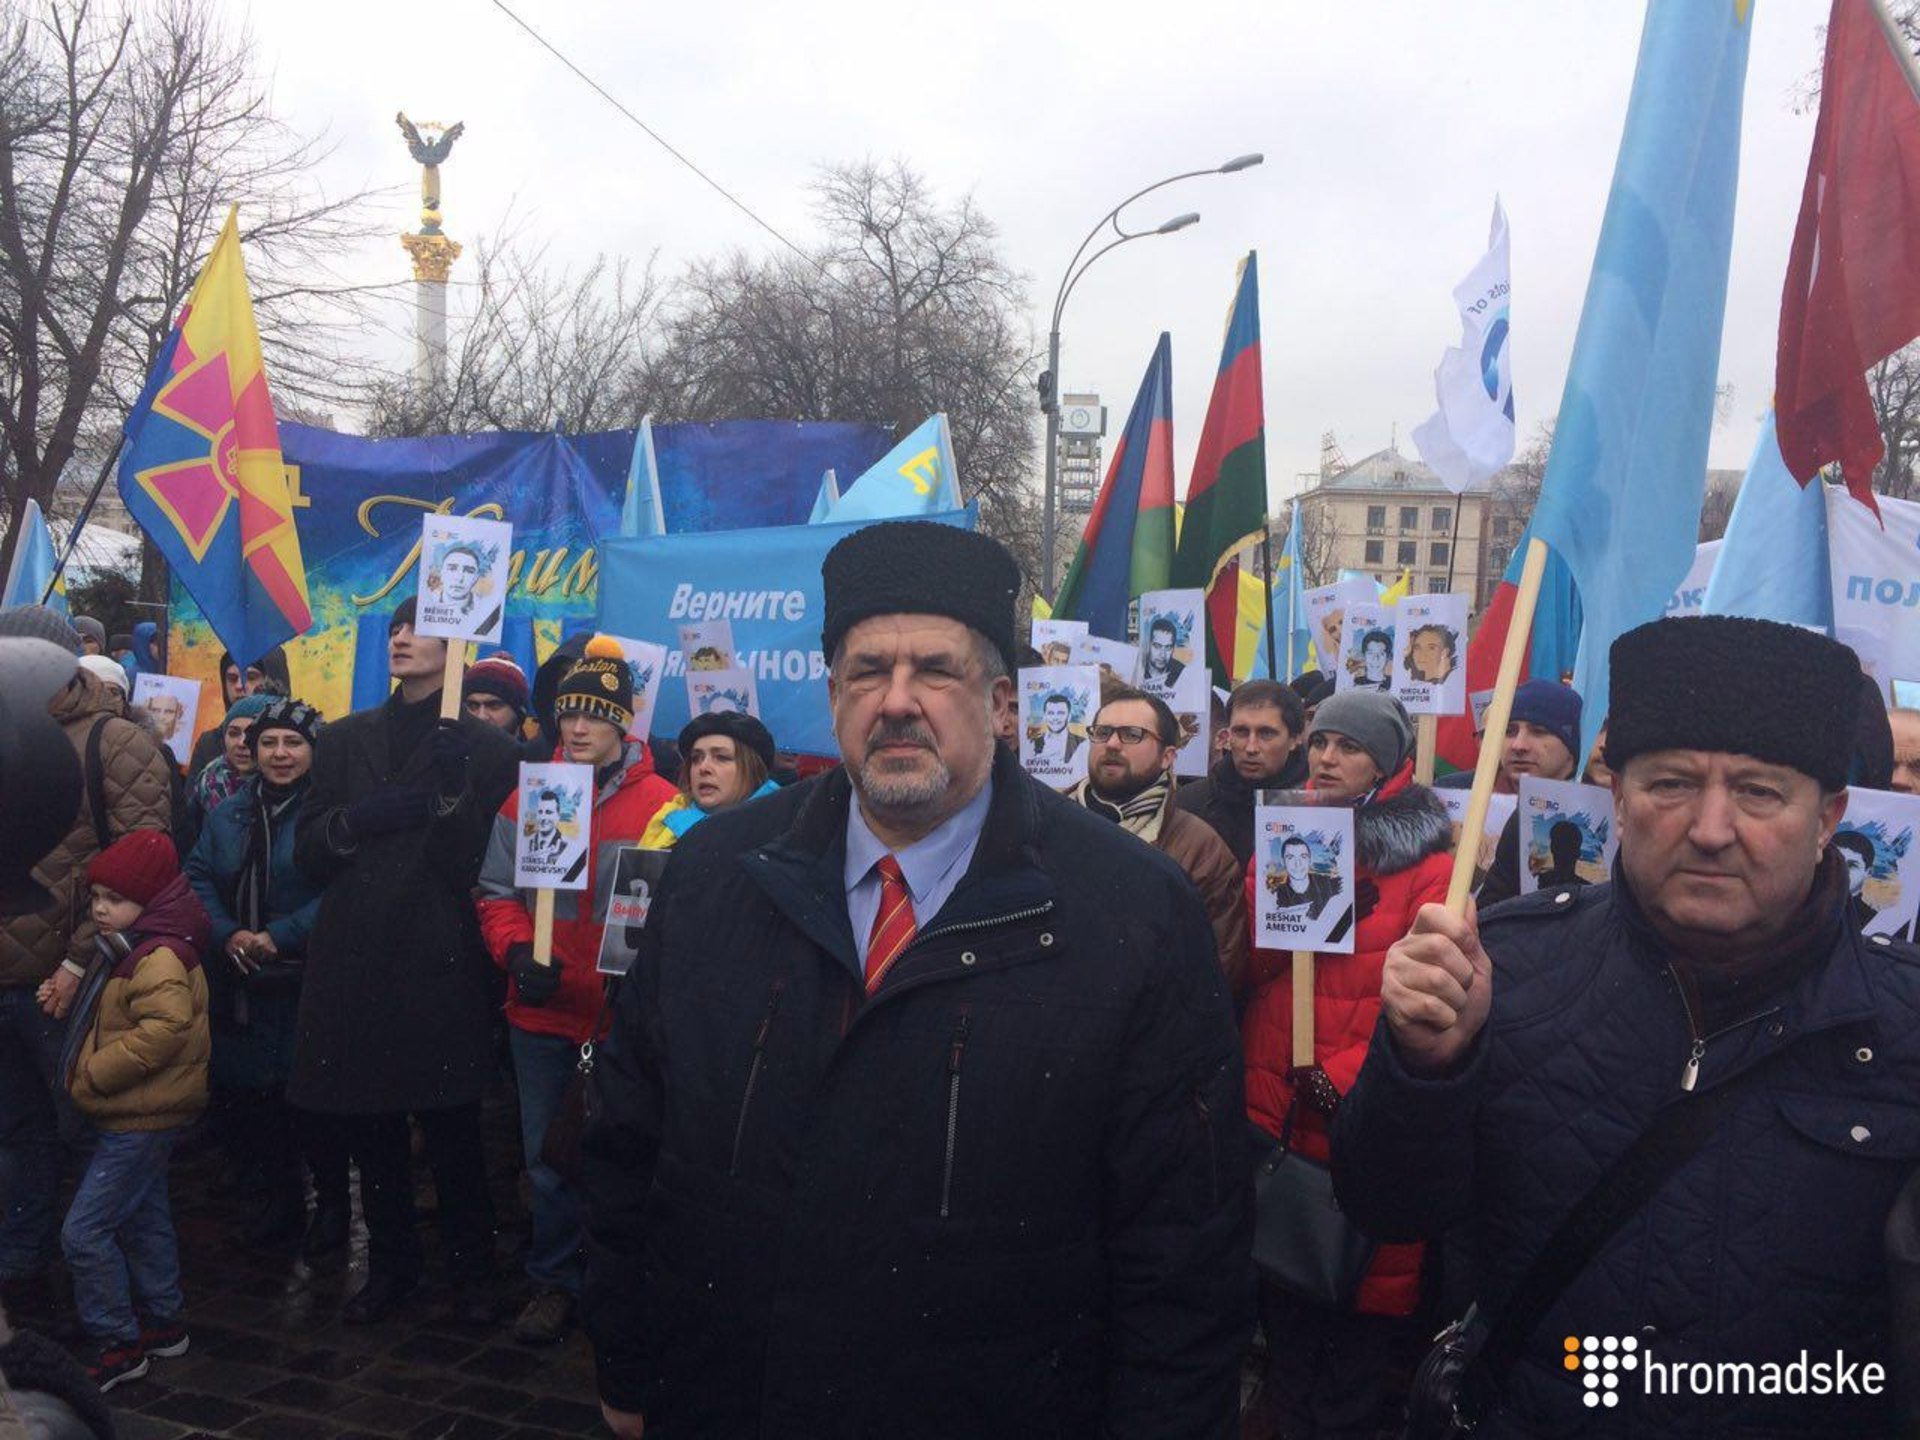 Crimean Tatar leader Refat Chubarov at march in solidarity with resistance to Russian occupation, Kyiv, 26 Feb. 2017. Photo: hromadske.ua